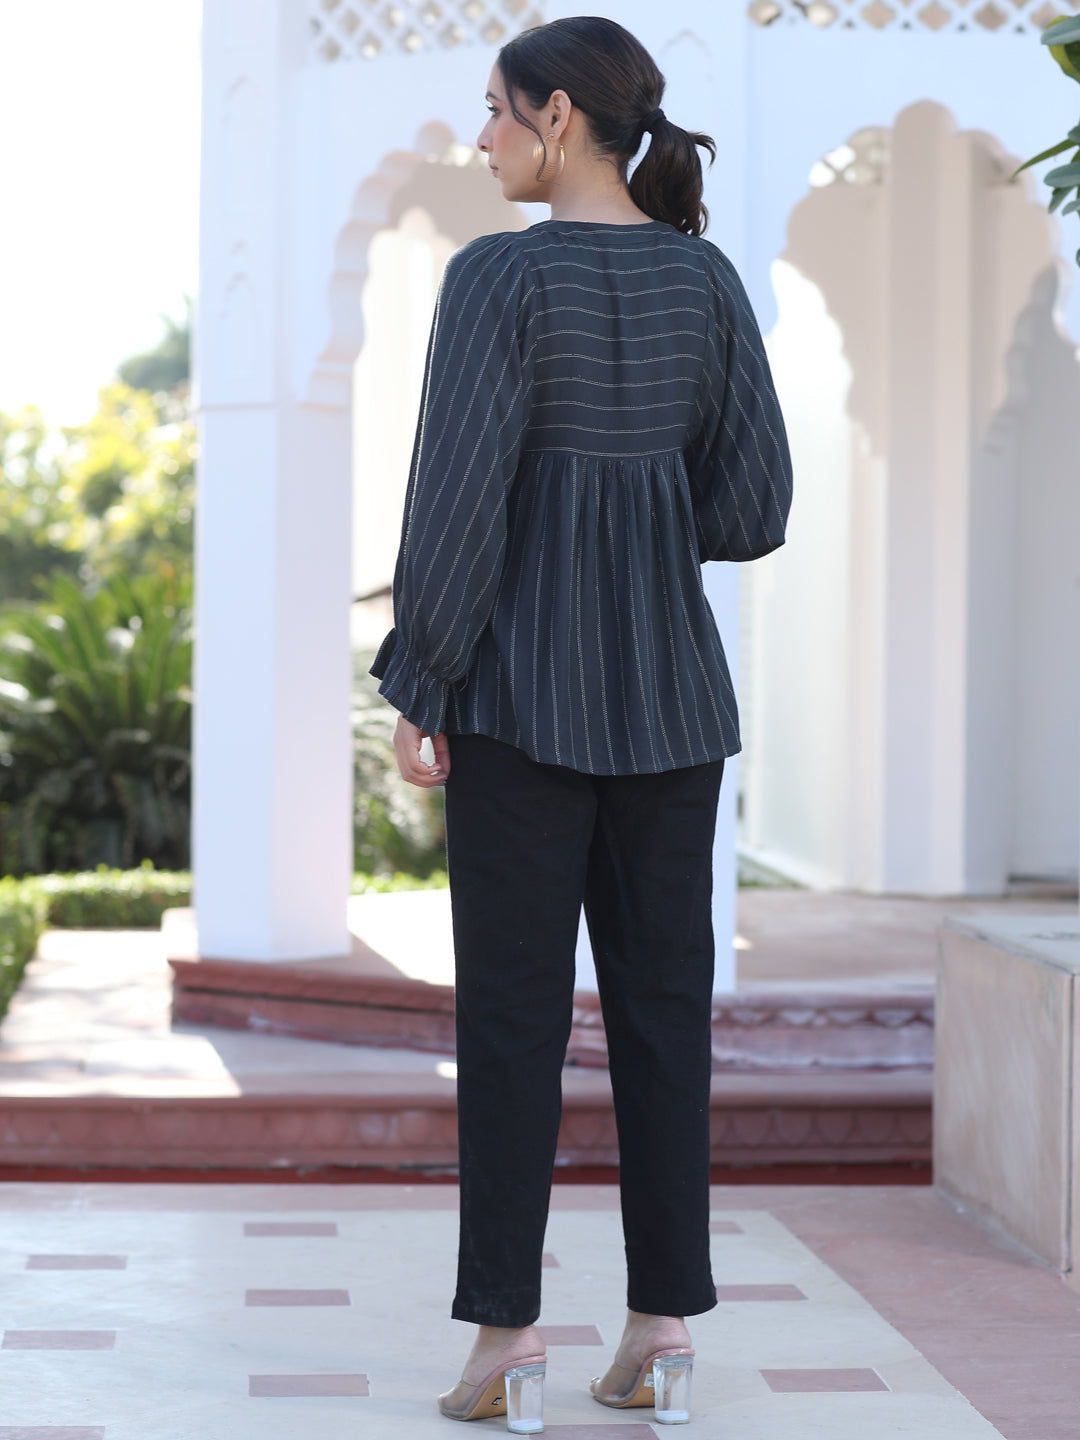 A Grey Self Weave Rayon Lurex Gathered Top With Elasticated Gathered Sleeves With Black Pants